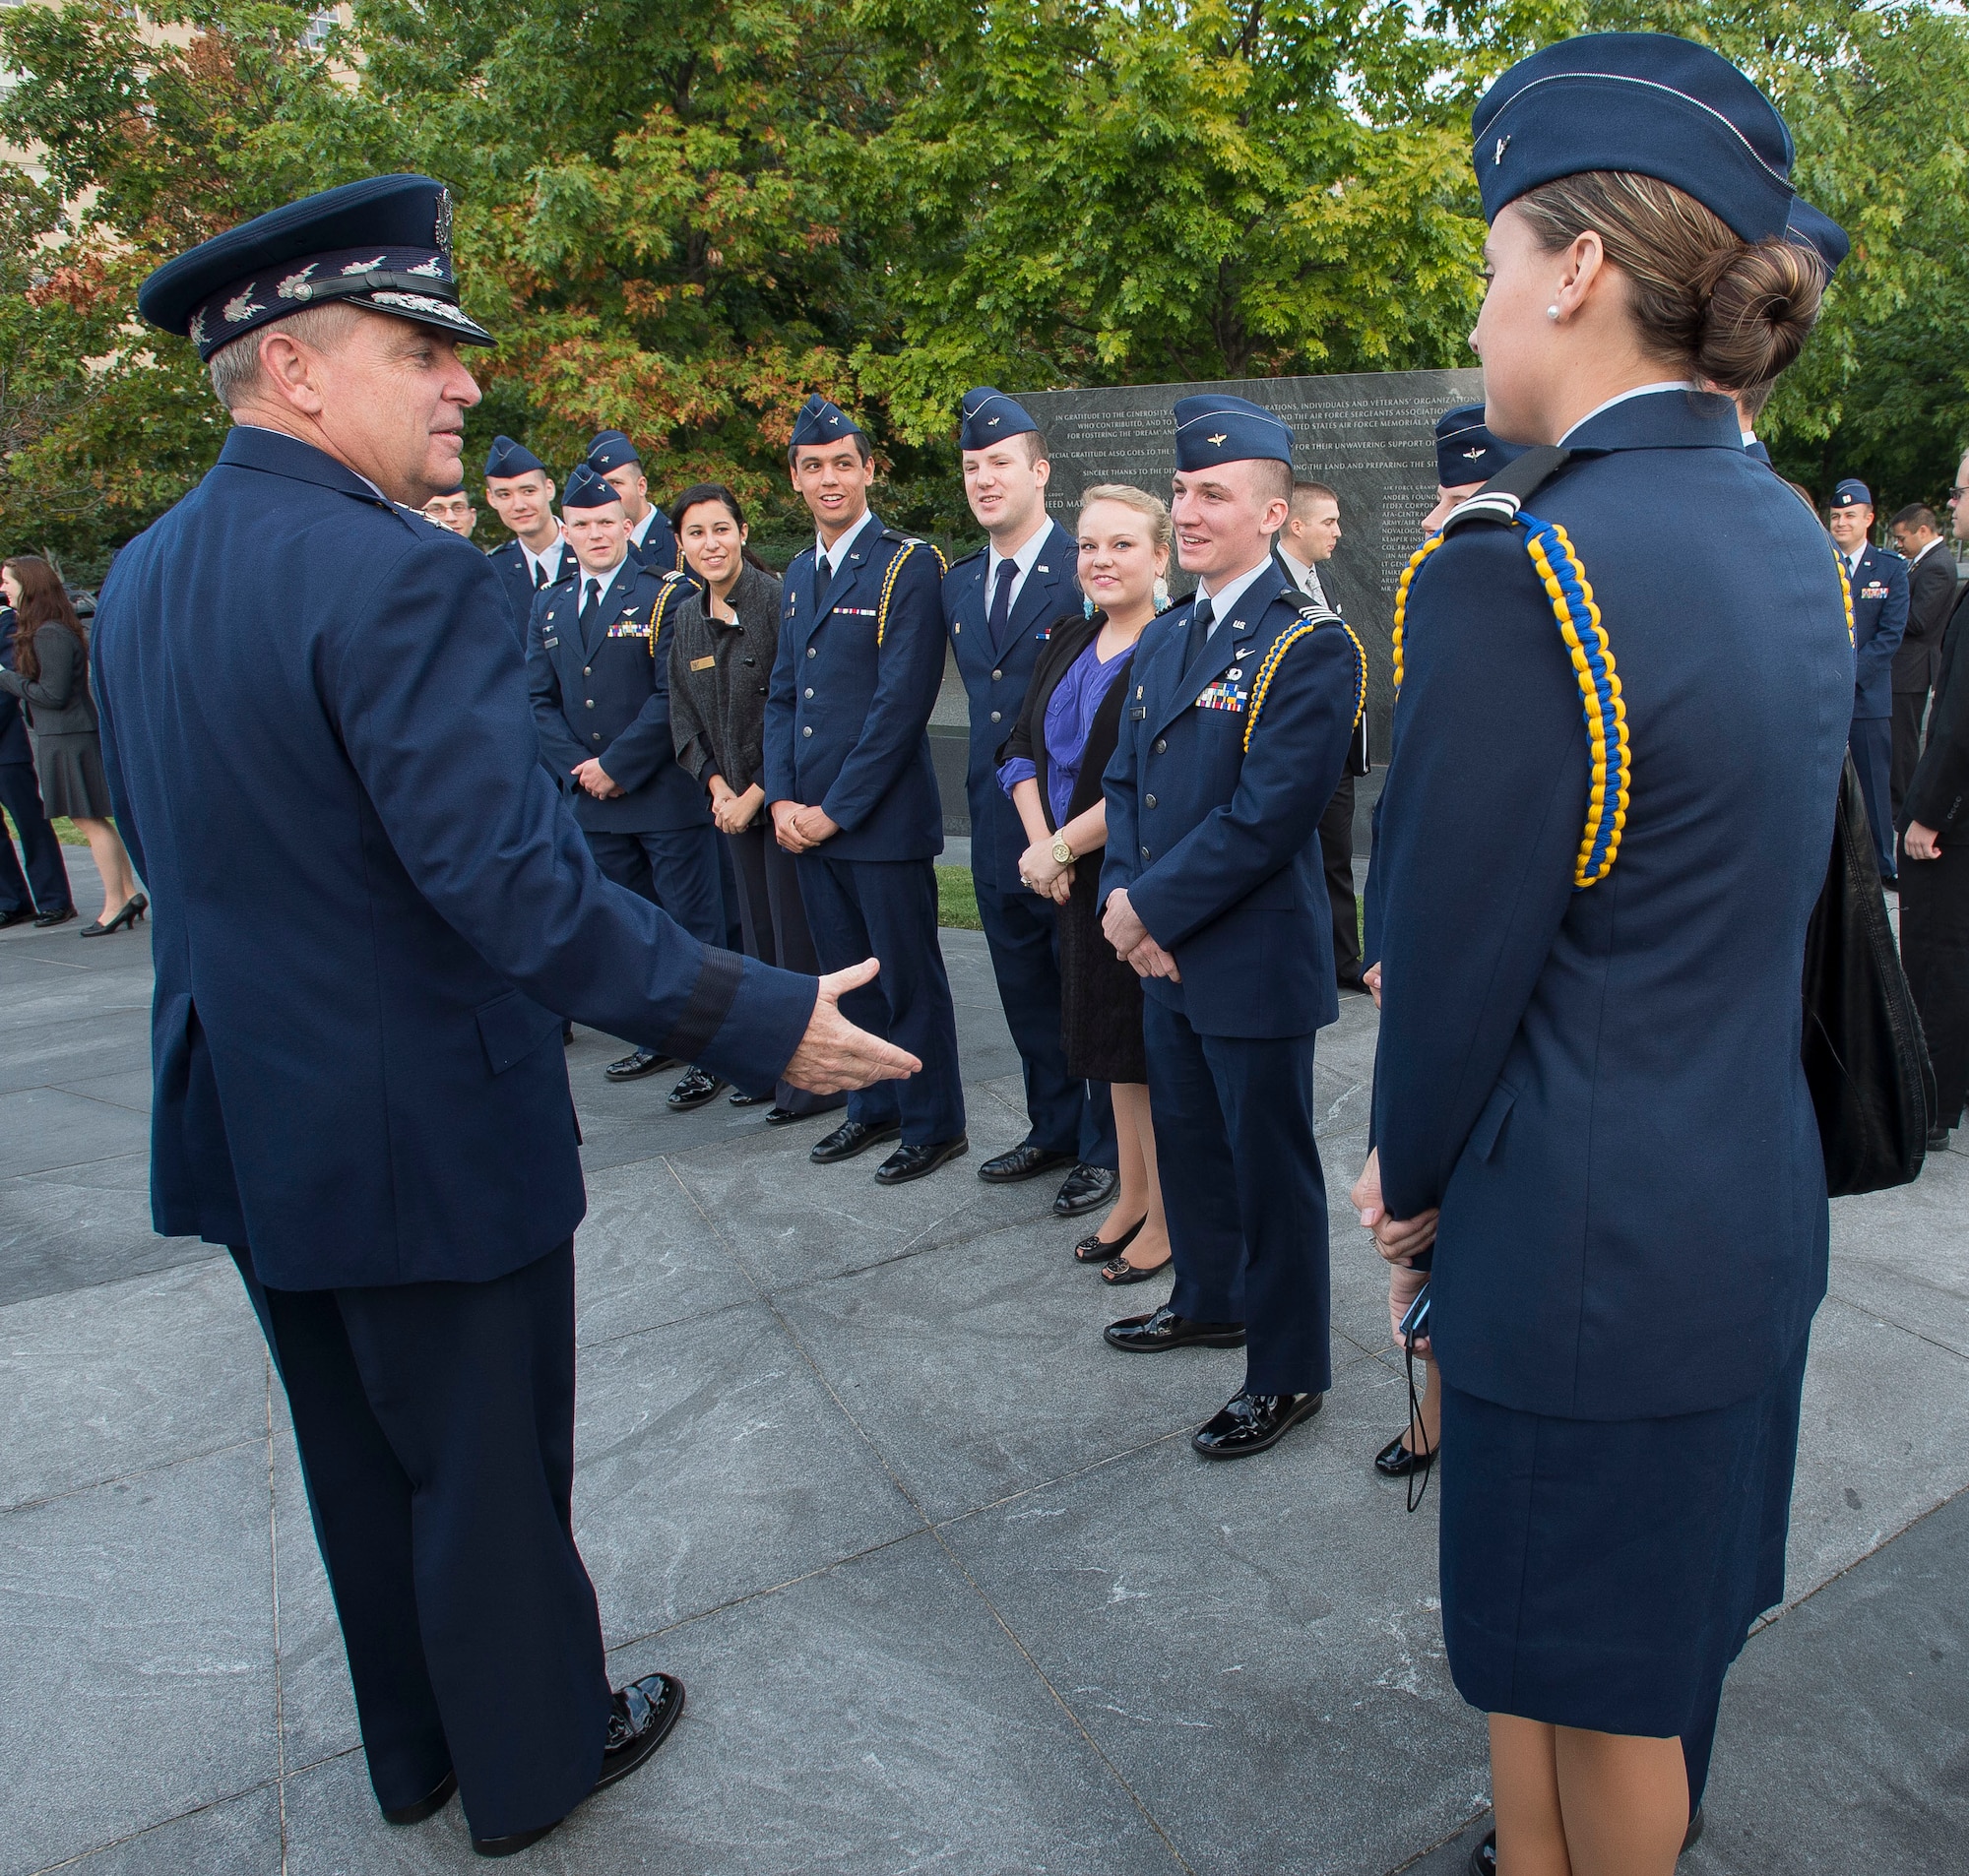 Air Force Chief of Staff Gen. Mark A. Welsh III, left, greets Air Force ROTC cadets from the Arnold Air Society prior to an Air Force Association wreath laying ceremony at the Air Force Memorial in Arlington, Va., Sept. 16, 2012. (U.S. Air Force photo/Jim Varhegyi)